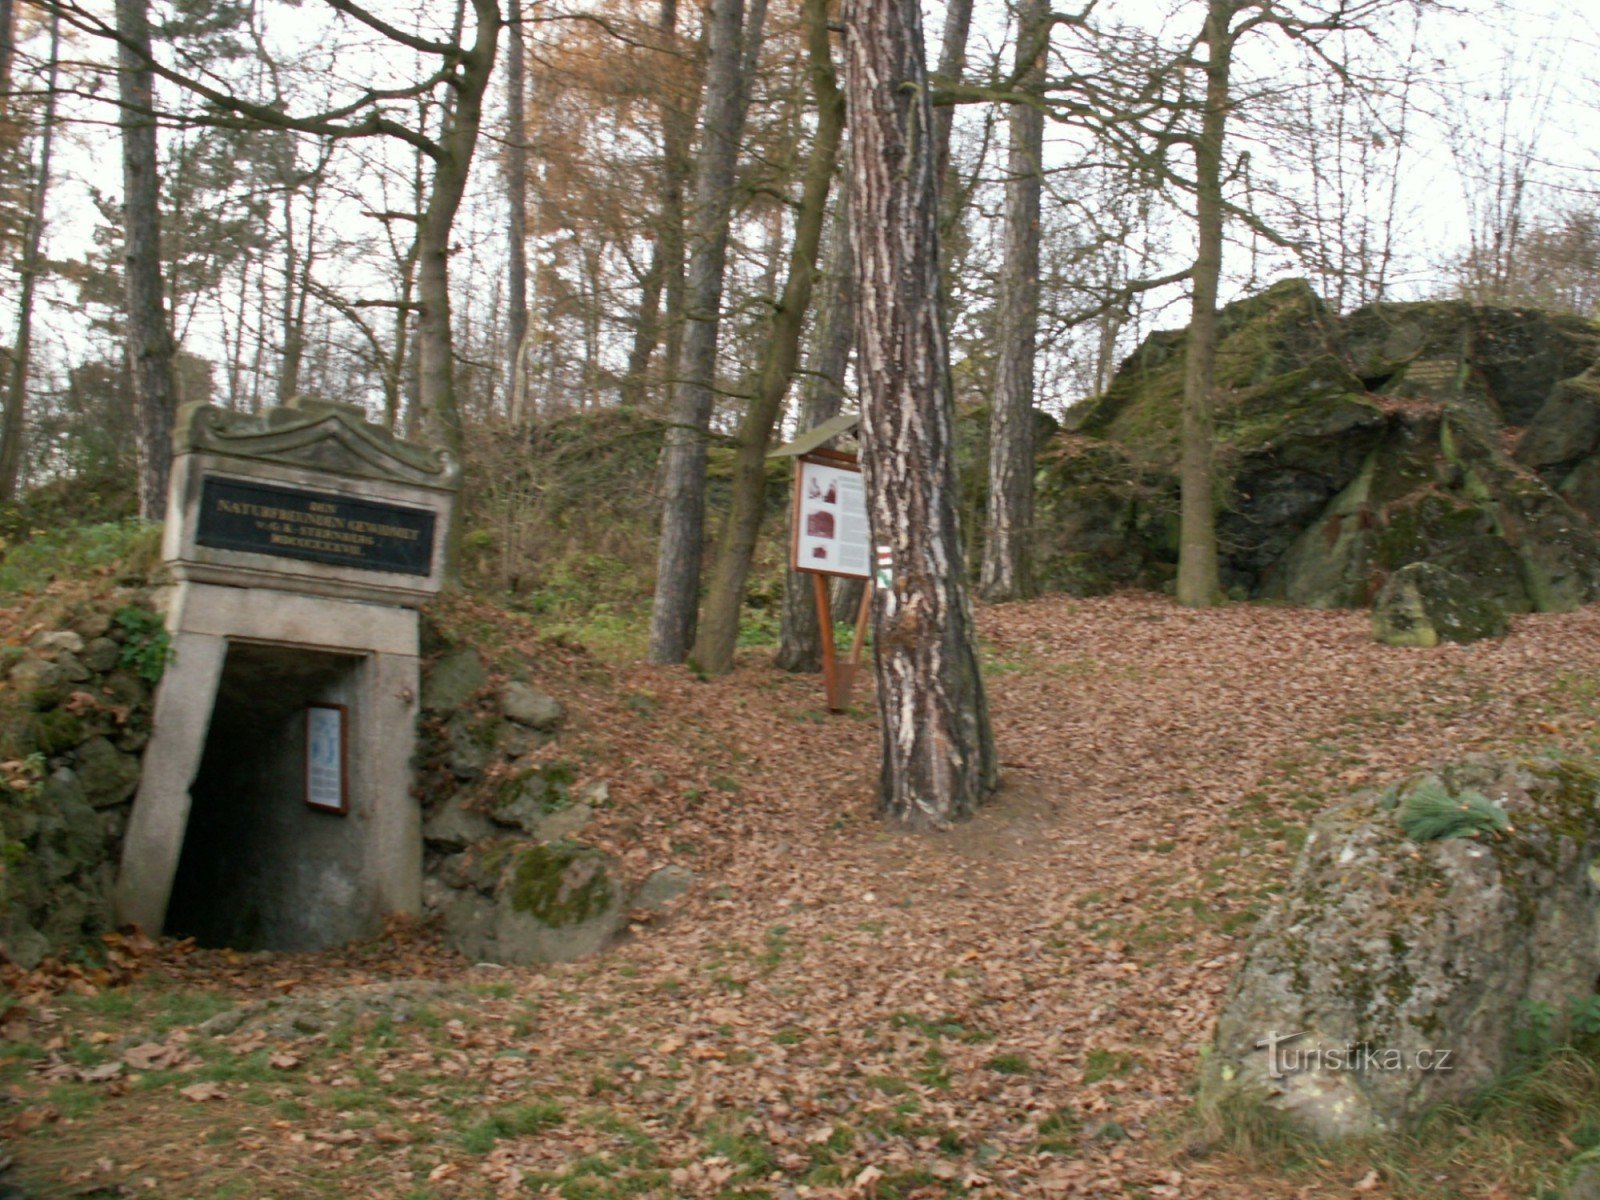 The brick entrance to the tunnel, now filled in